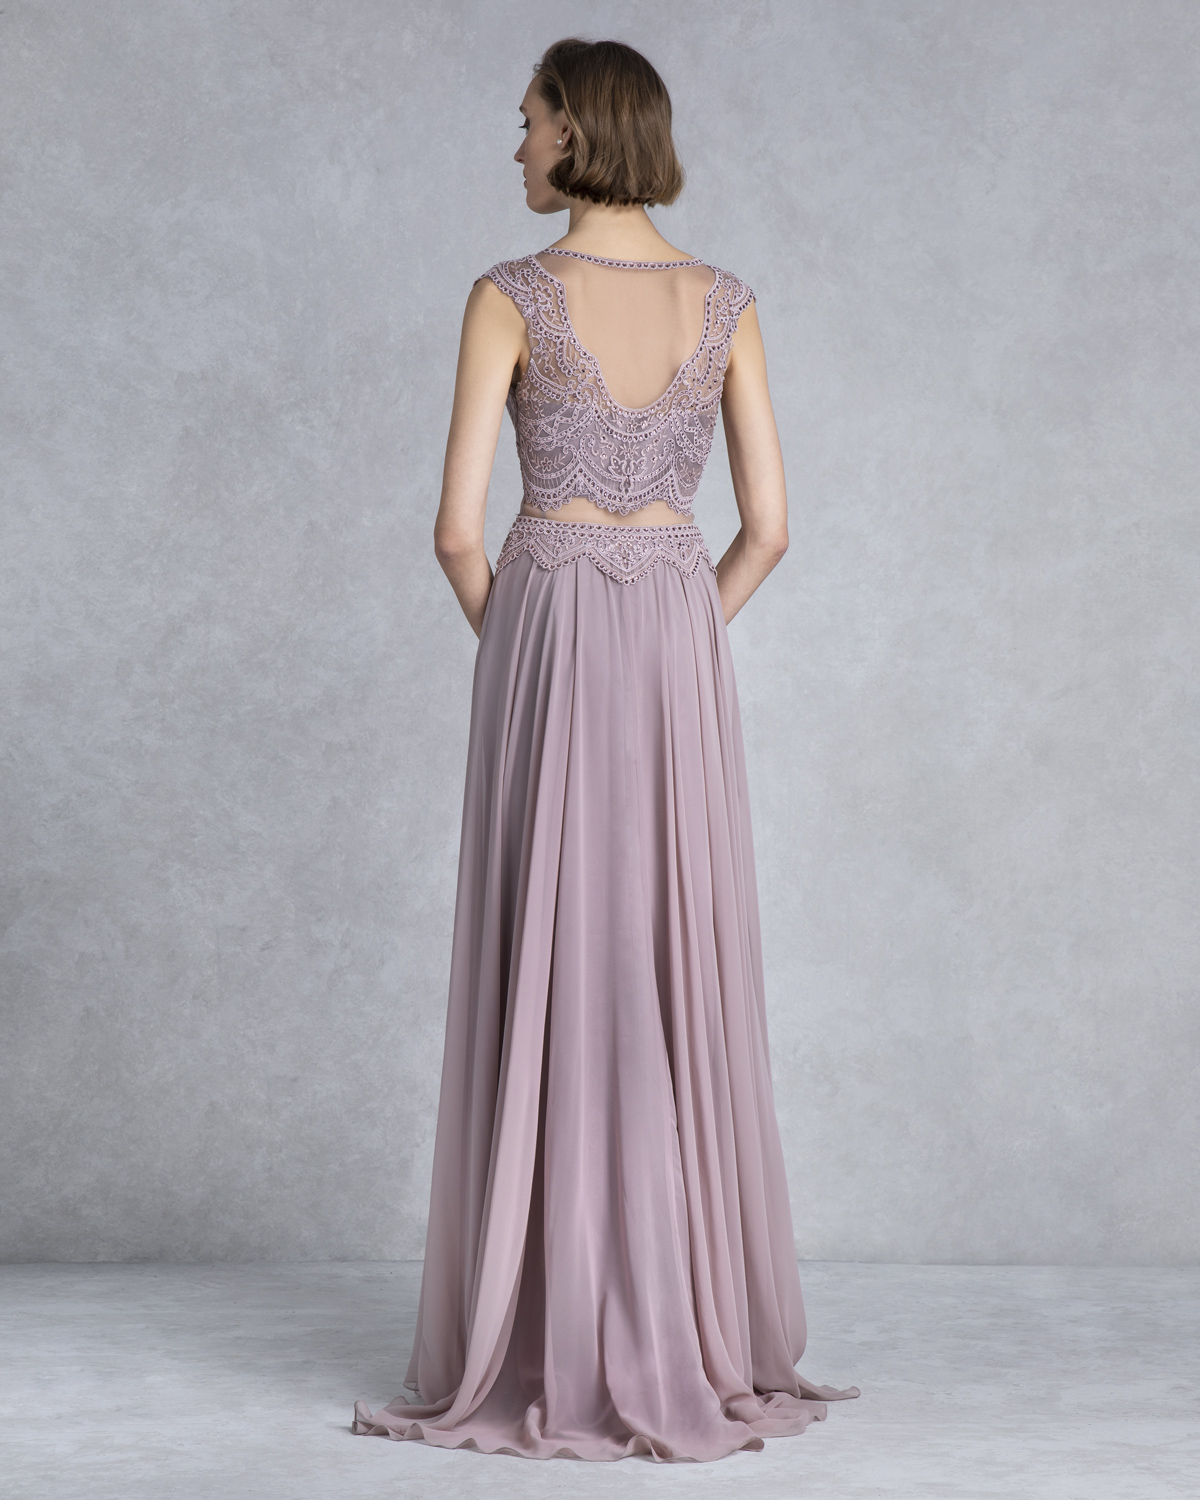 Evening Dresses / Long evening dress with lace and beading on the top